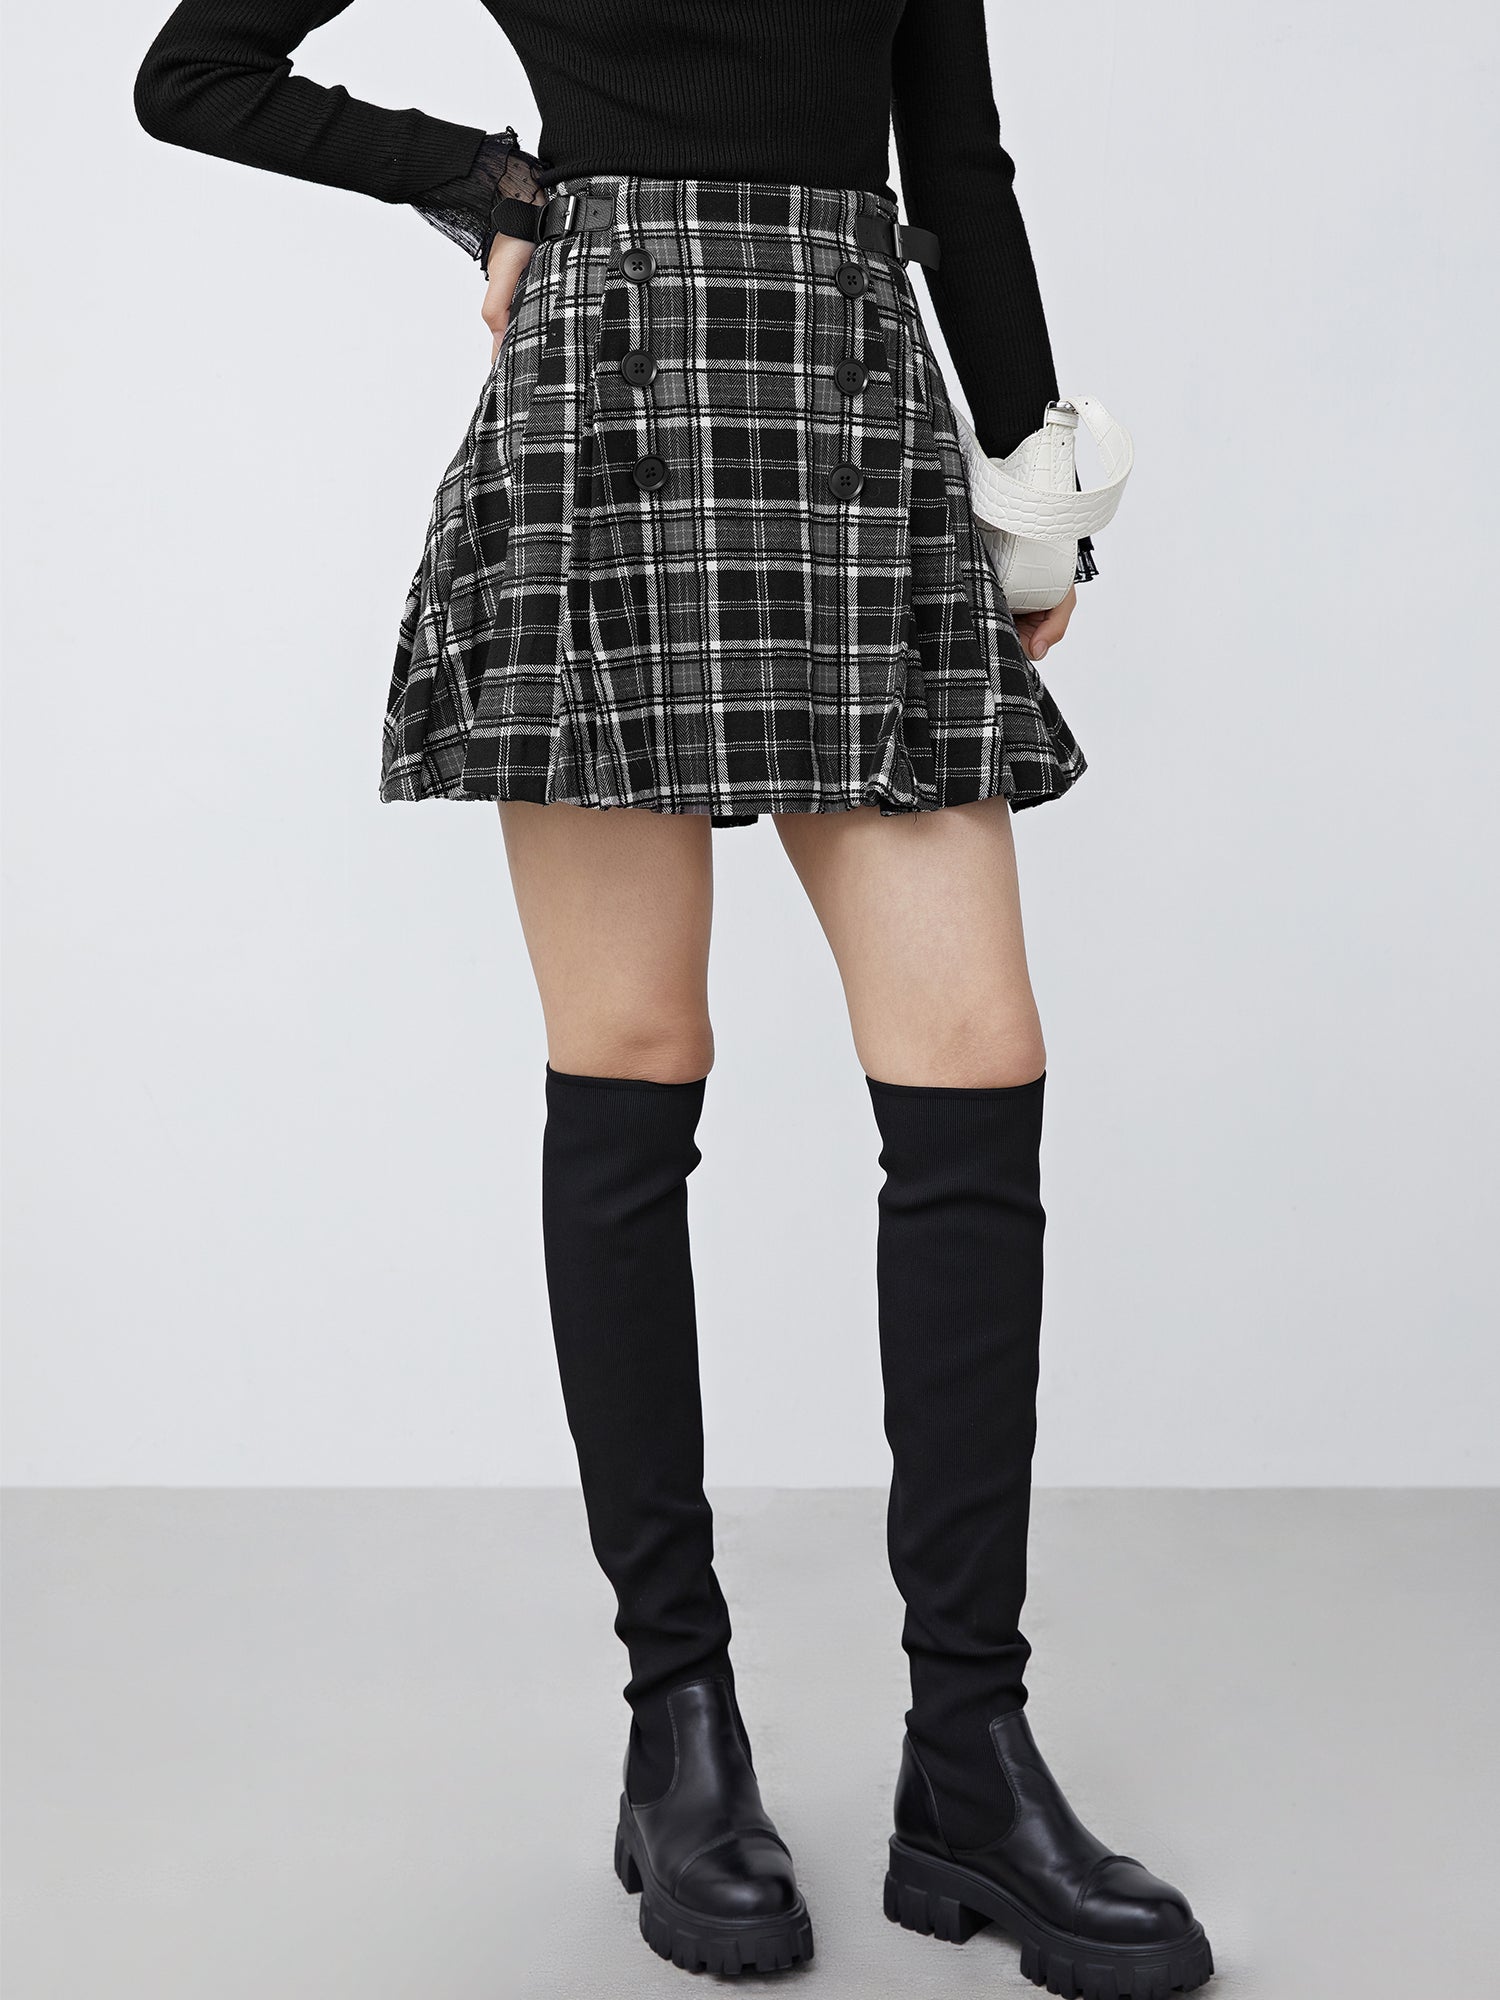 Vintage Plaid Leather Patchwork A-Line Pleated Skirt